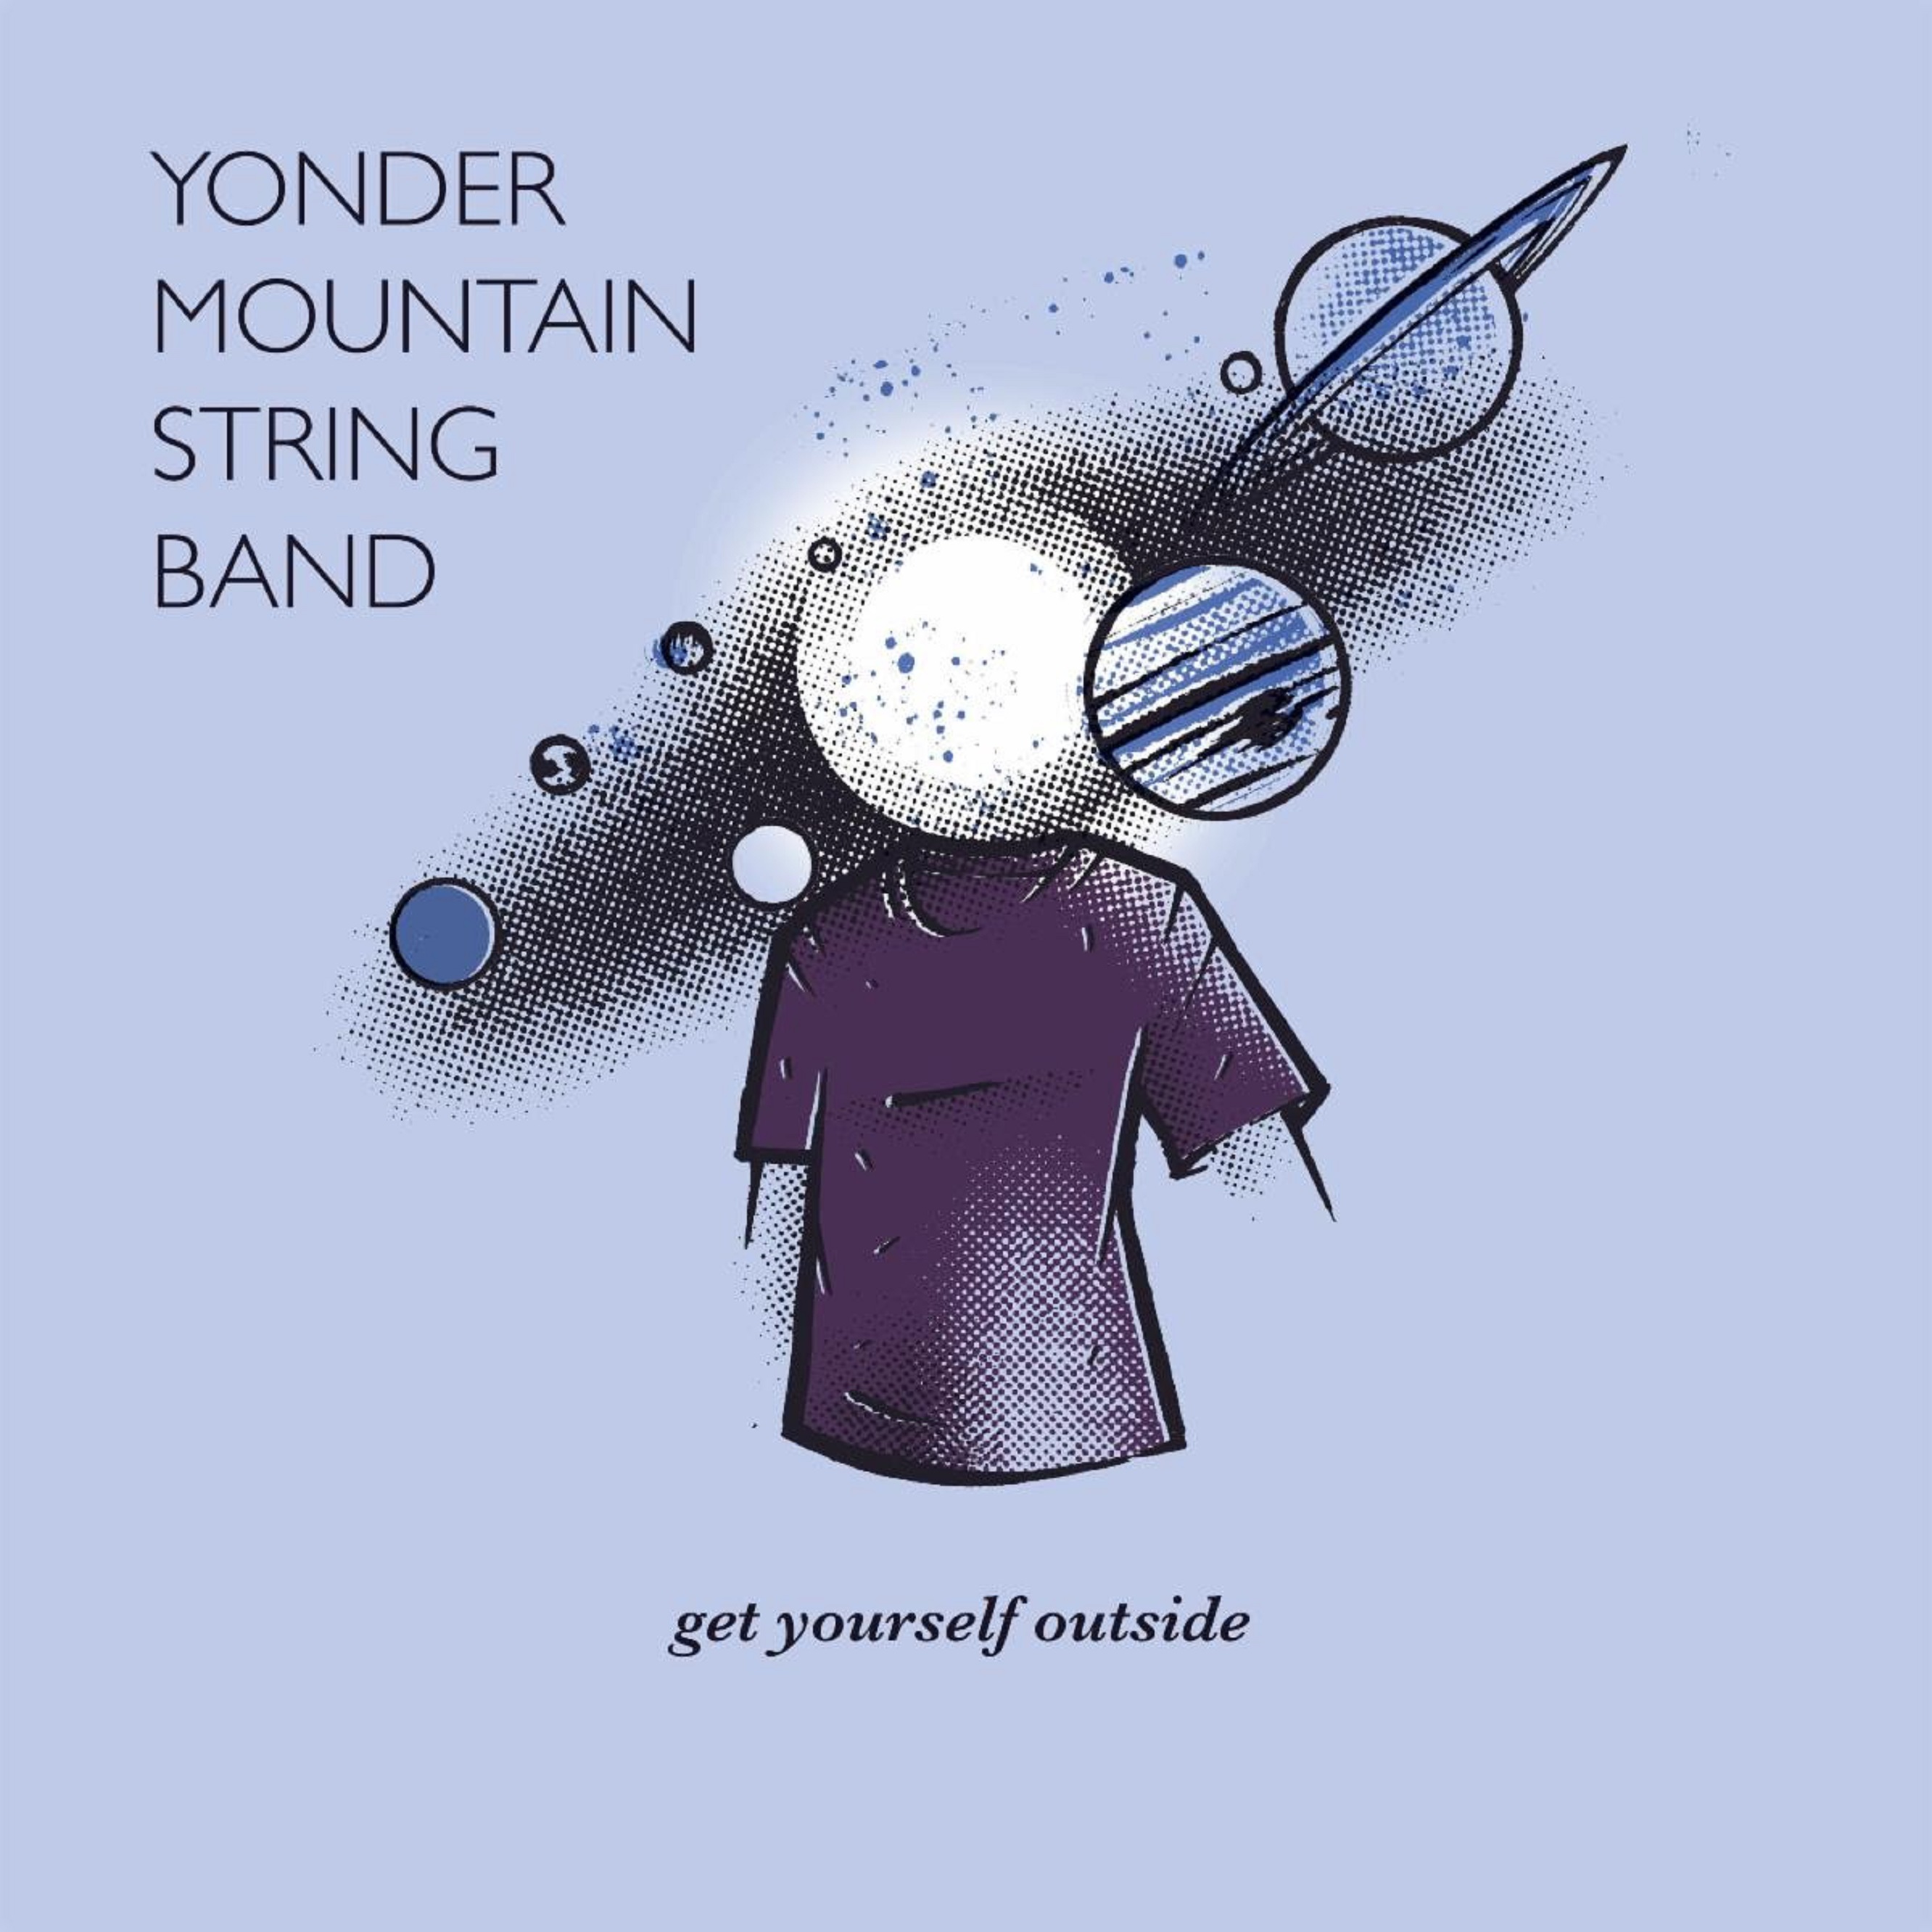 Yonder Mountain String Band Share New Tune “If Only” From Upcoming Album